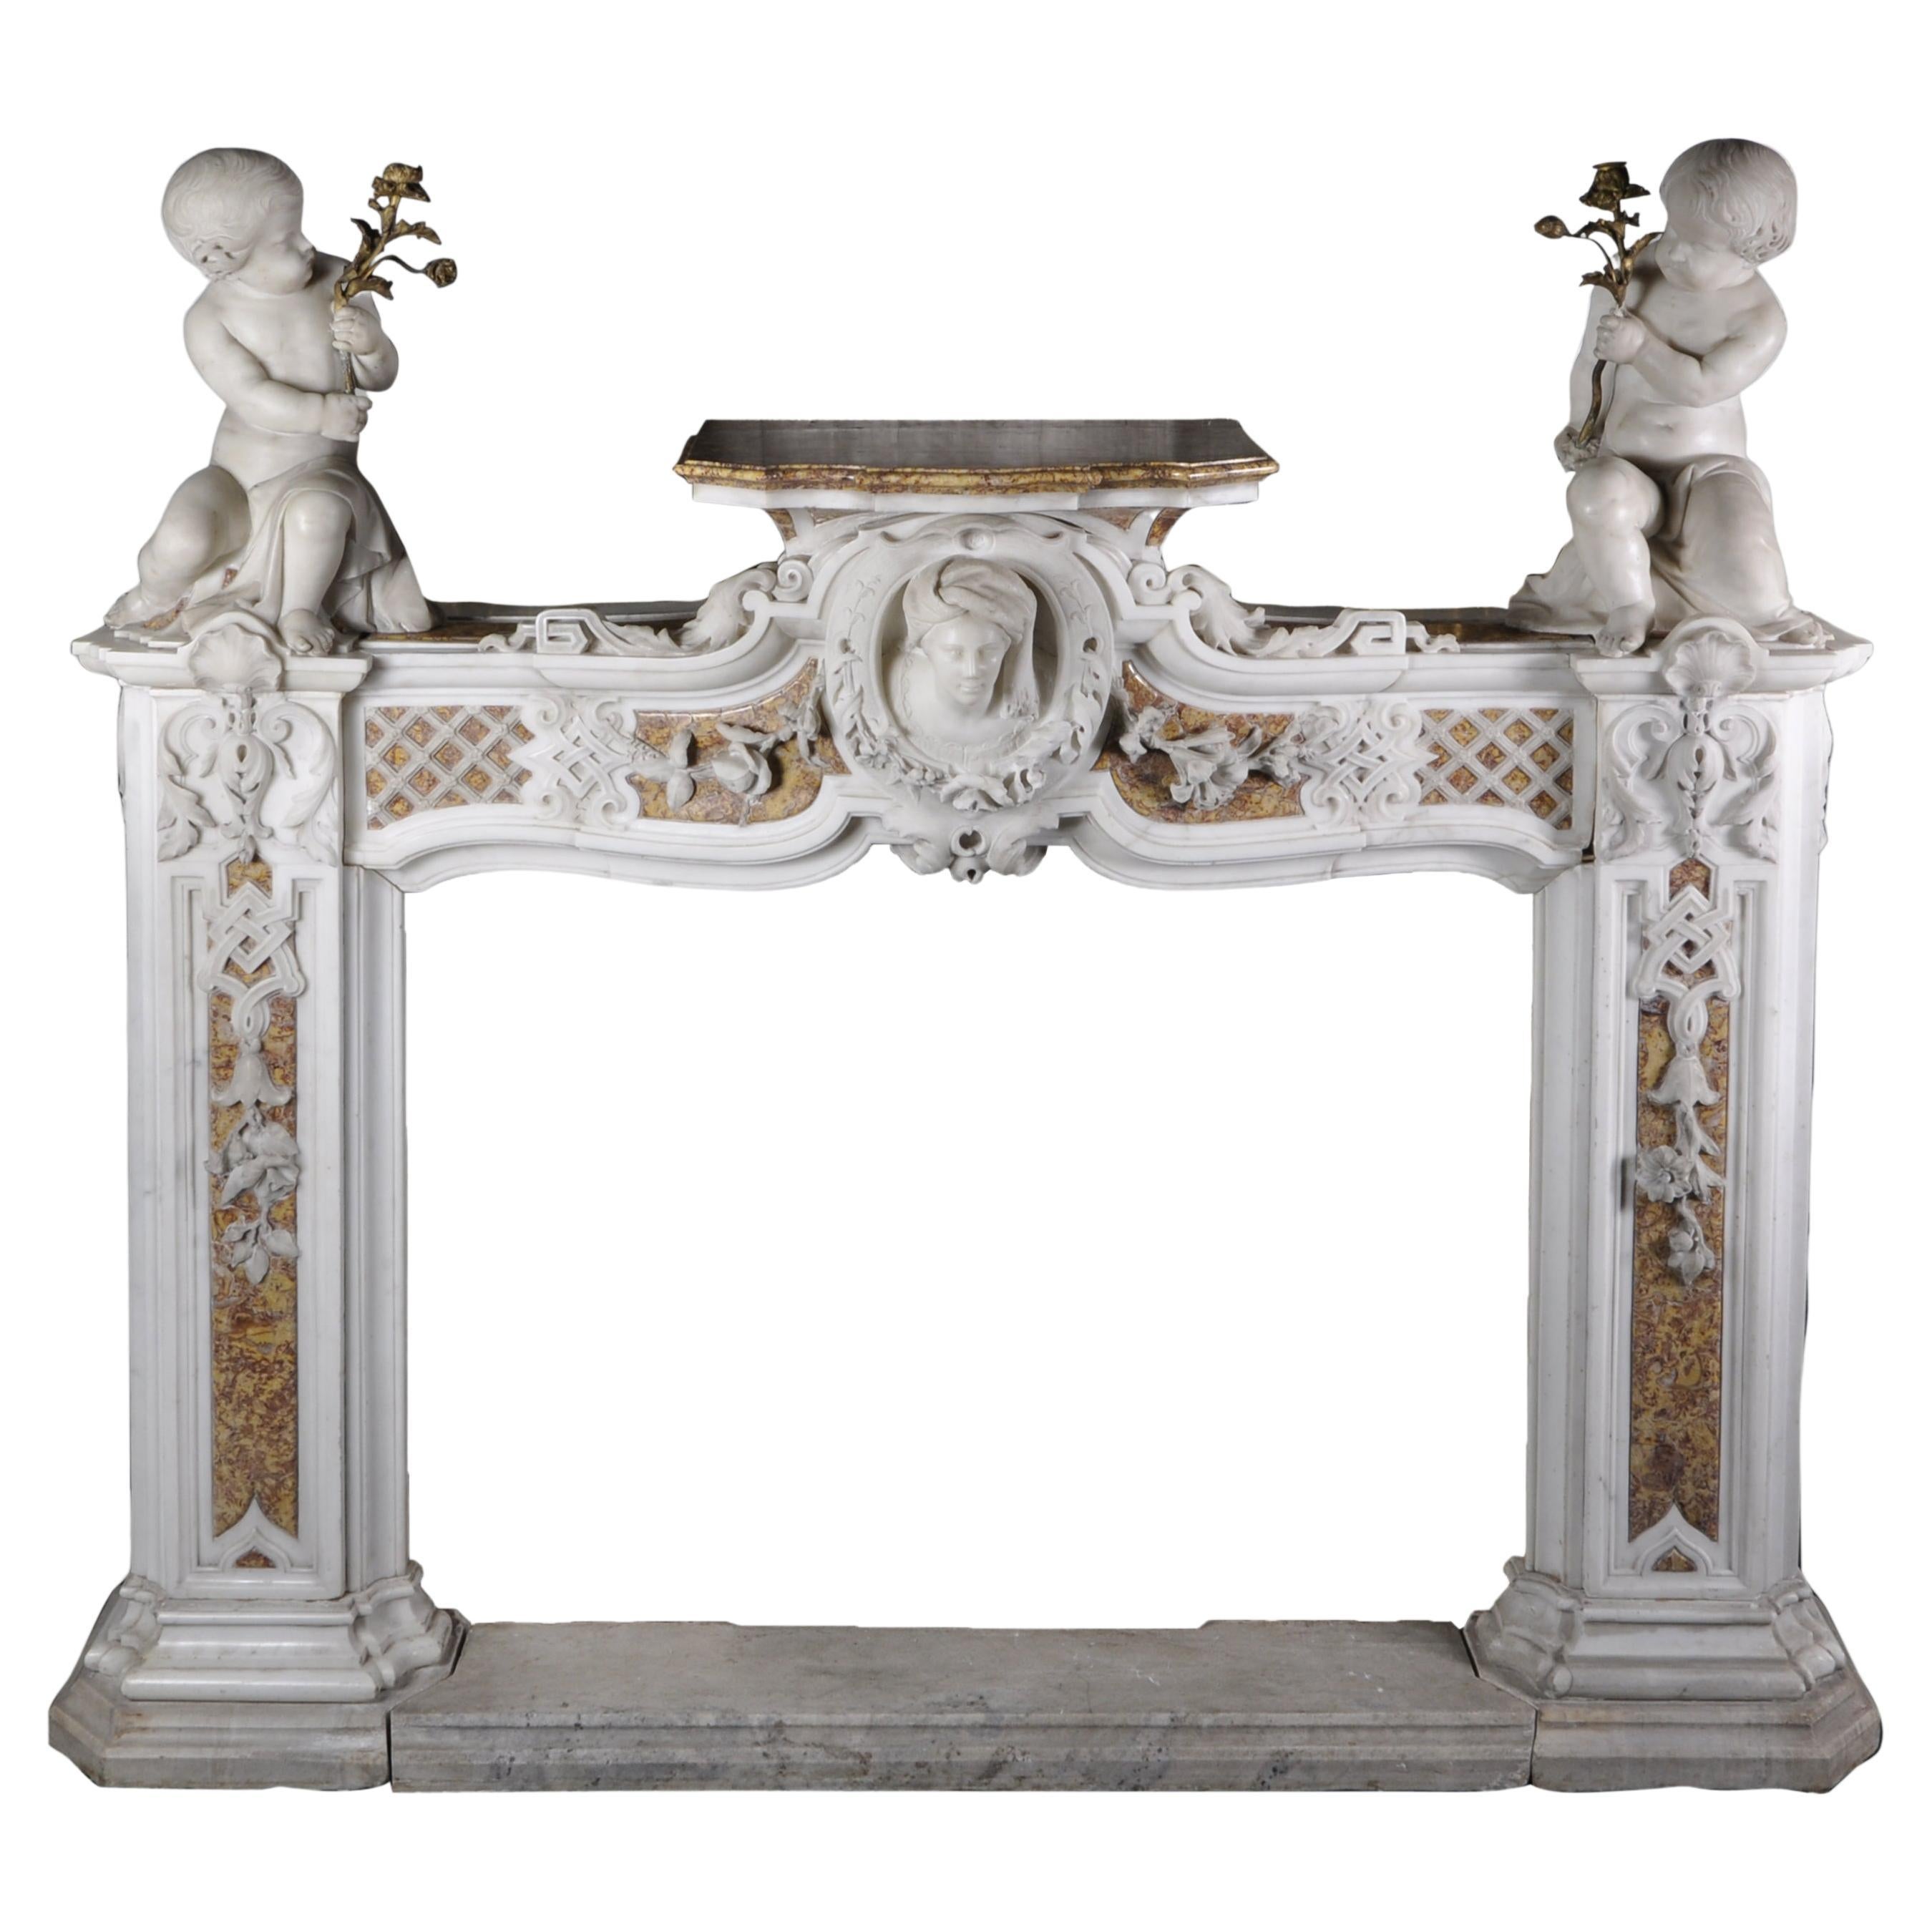 Late 18th century Statuary and Brocatelle marble fireplace with putti